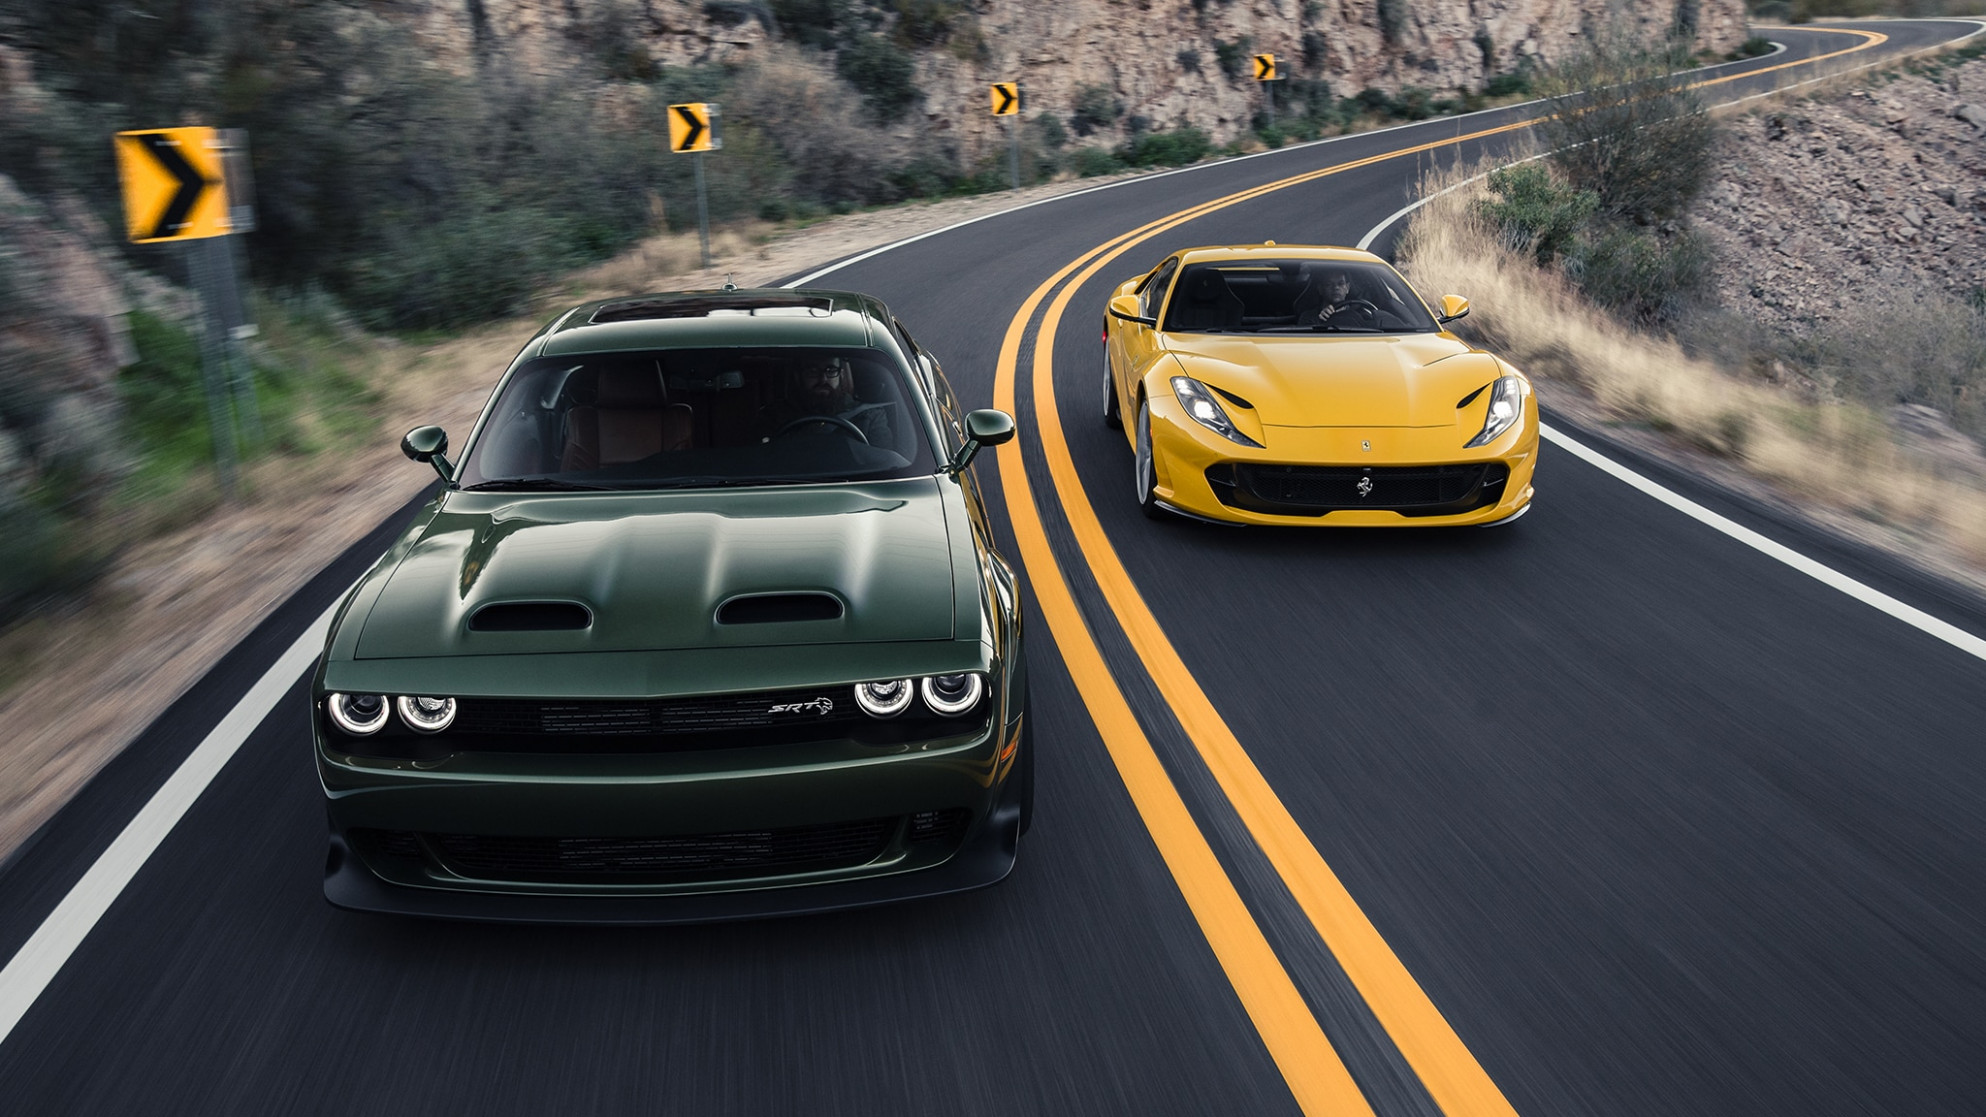 Redesign and Review 2022 Challenger Srt8 Hellcat